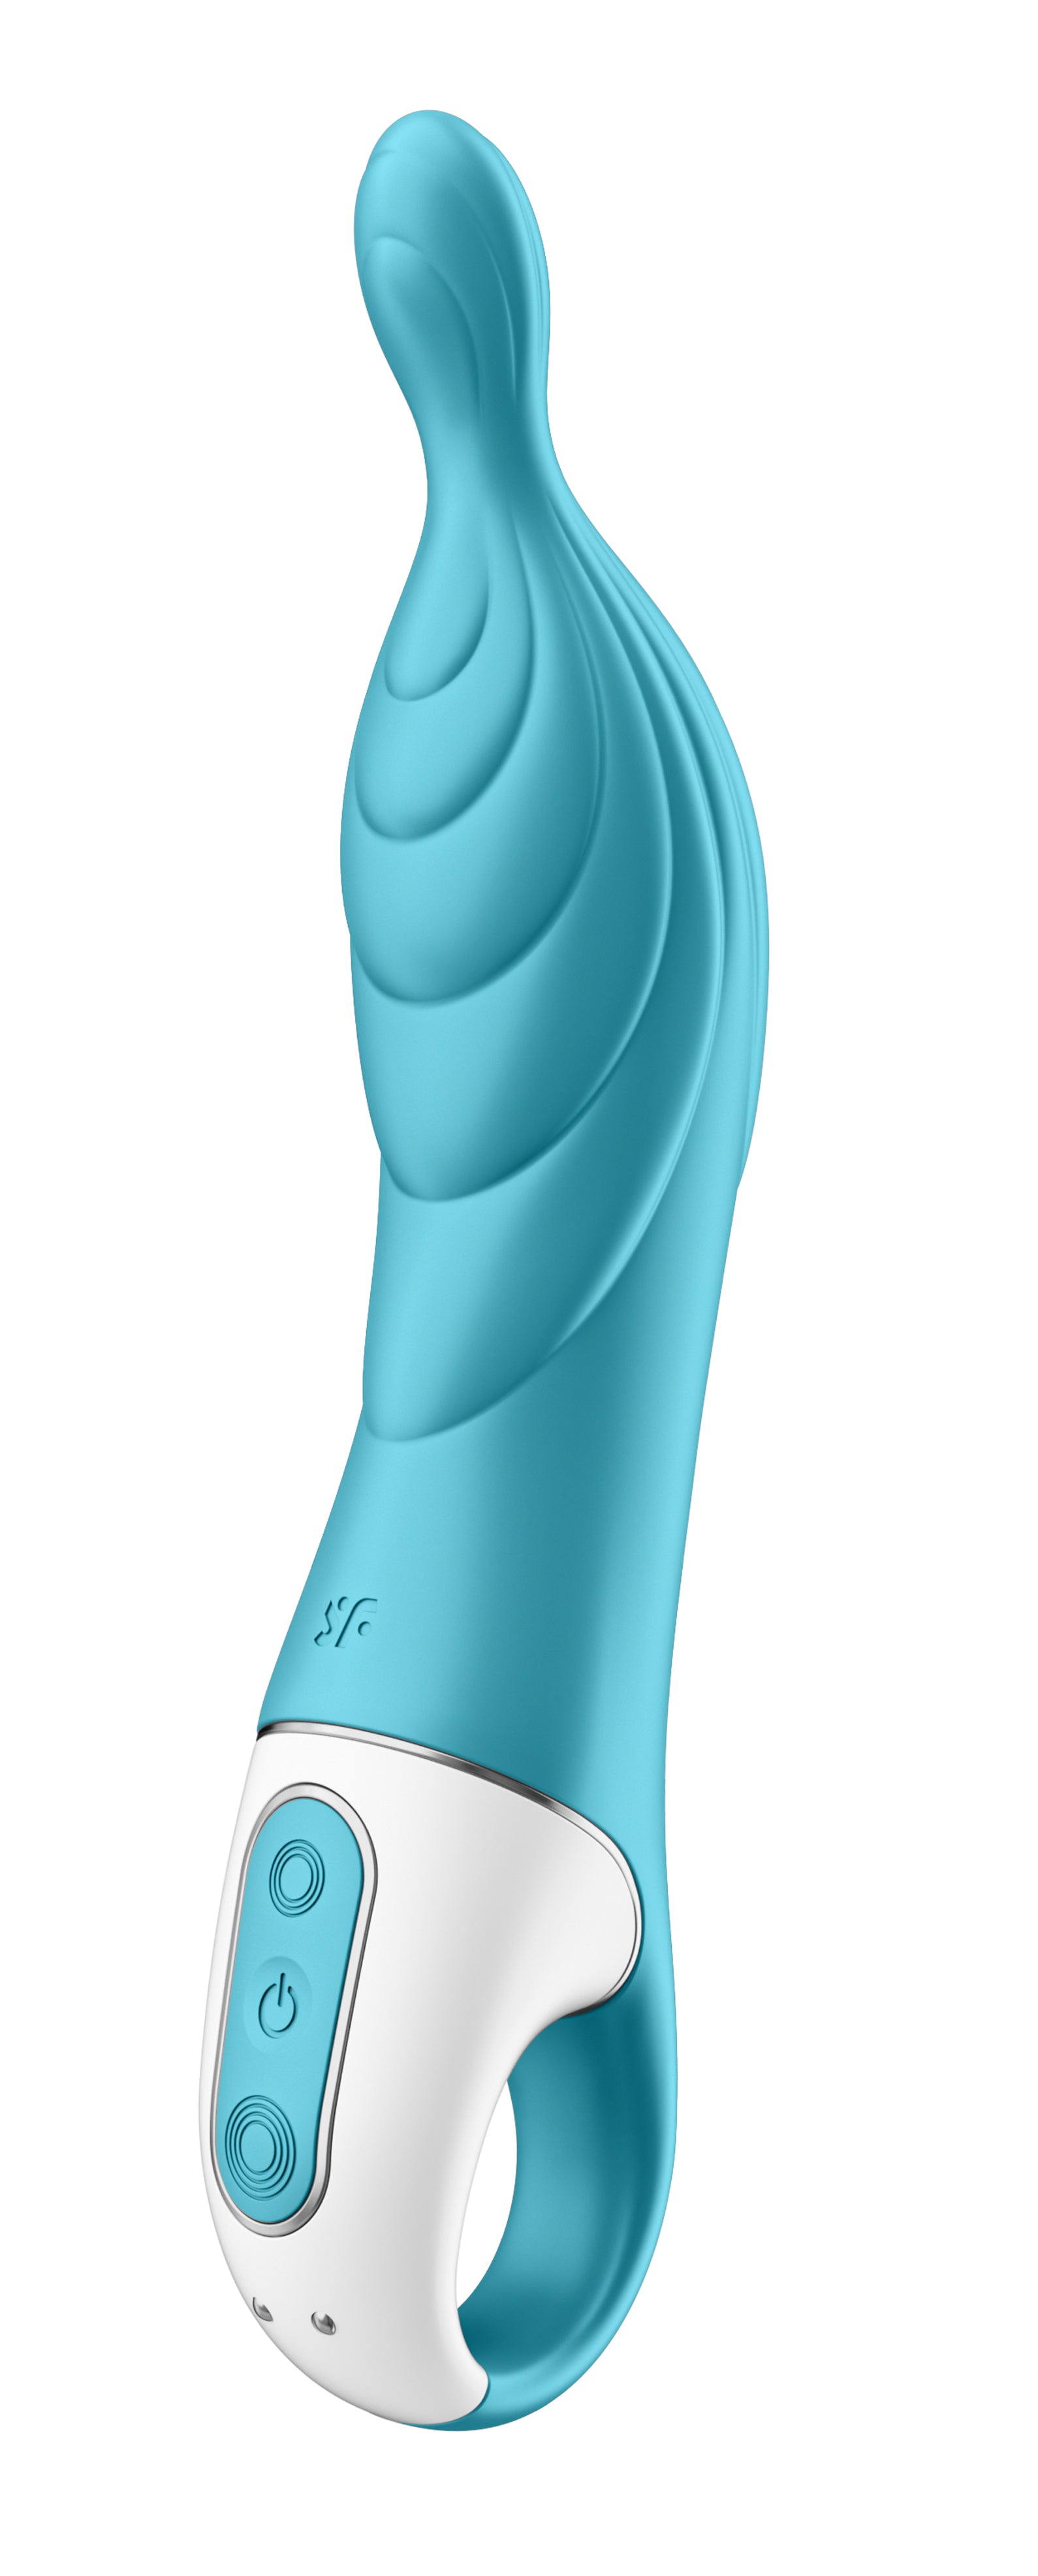 A-Mazing 2 a-Spot Vibrator - Turquoise Turquoise-1